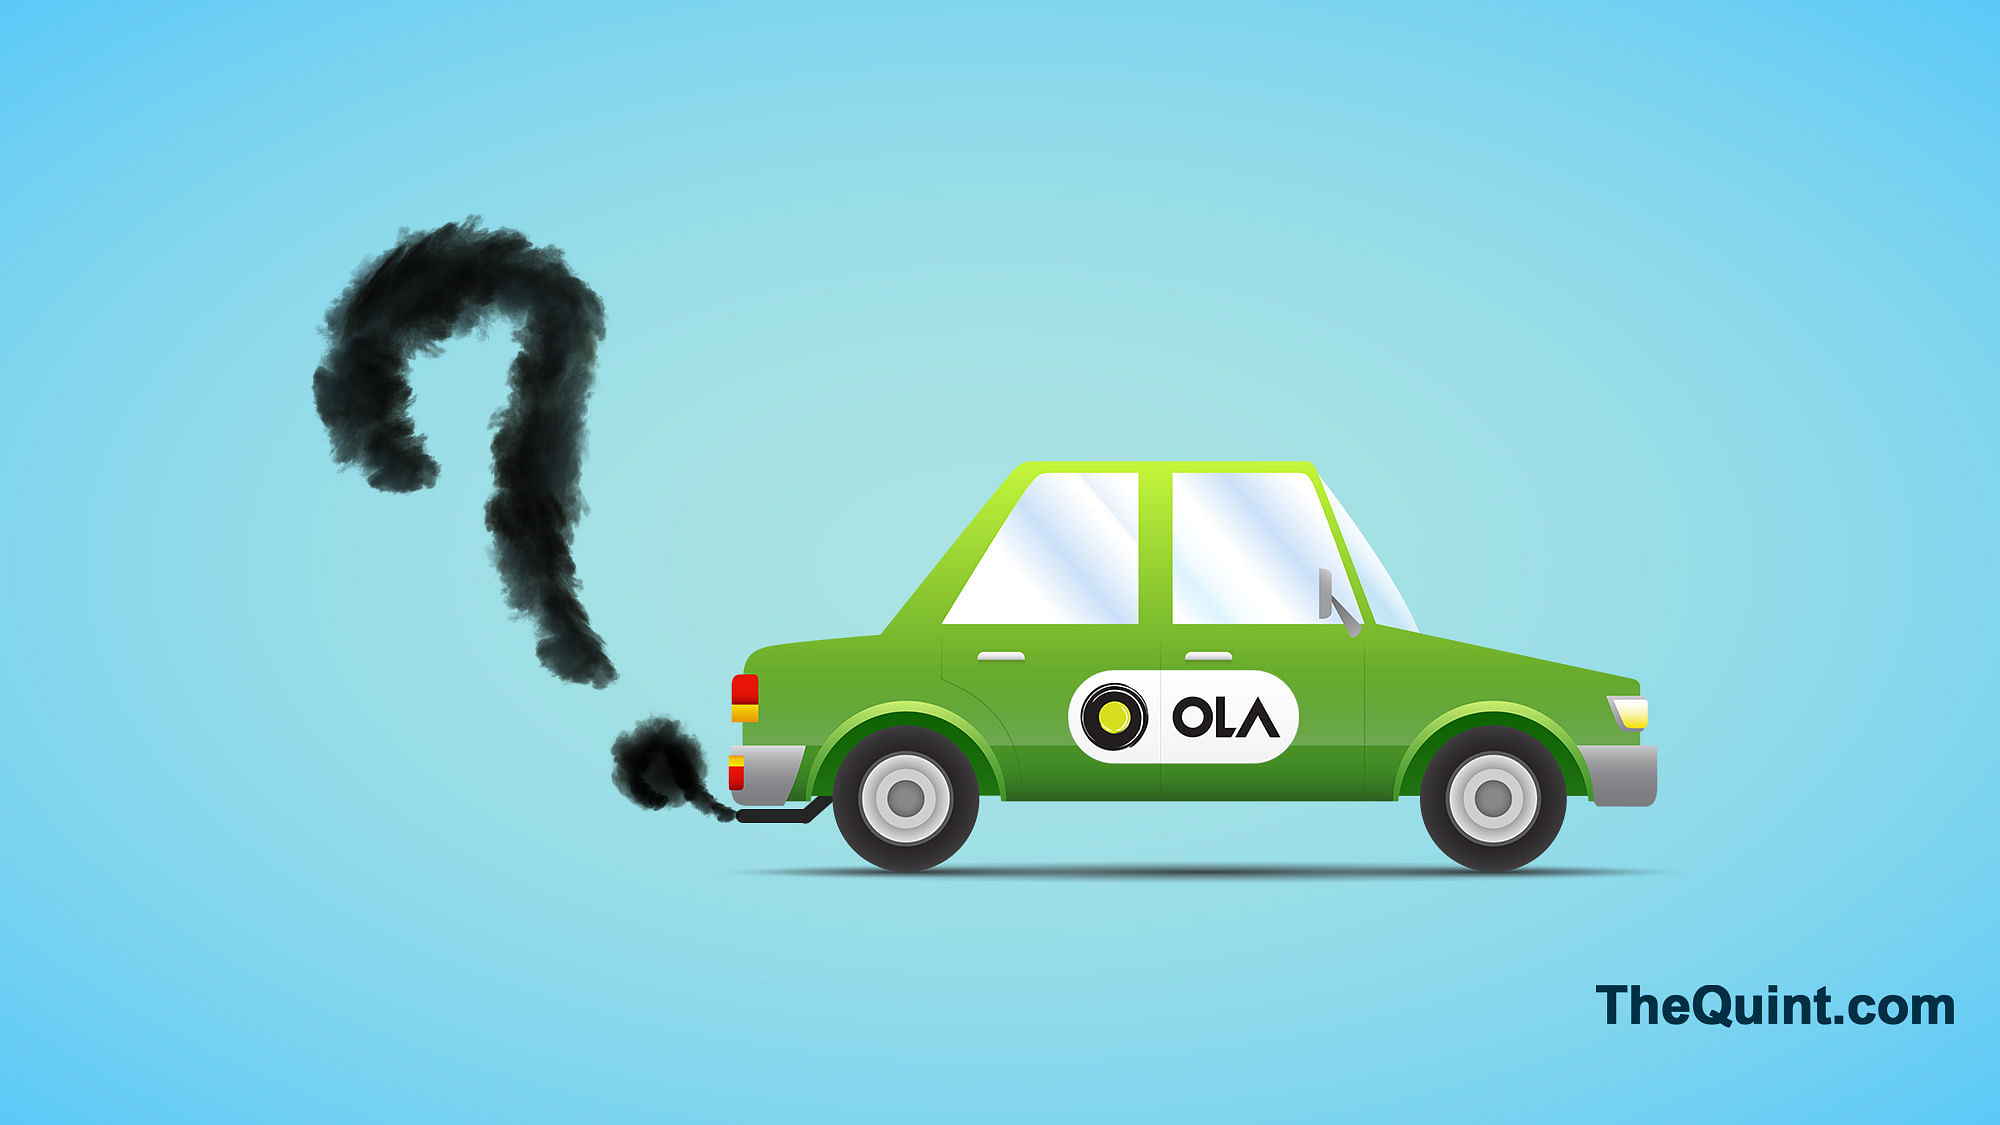 Is Ola really cutting down India’s carbon emissions? (Image: Hardeep Singh/<b>The Quint</b>)